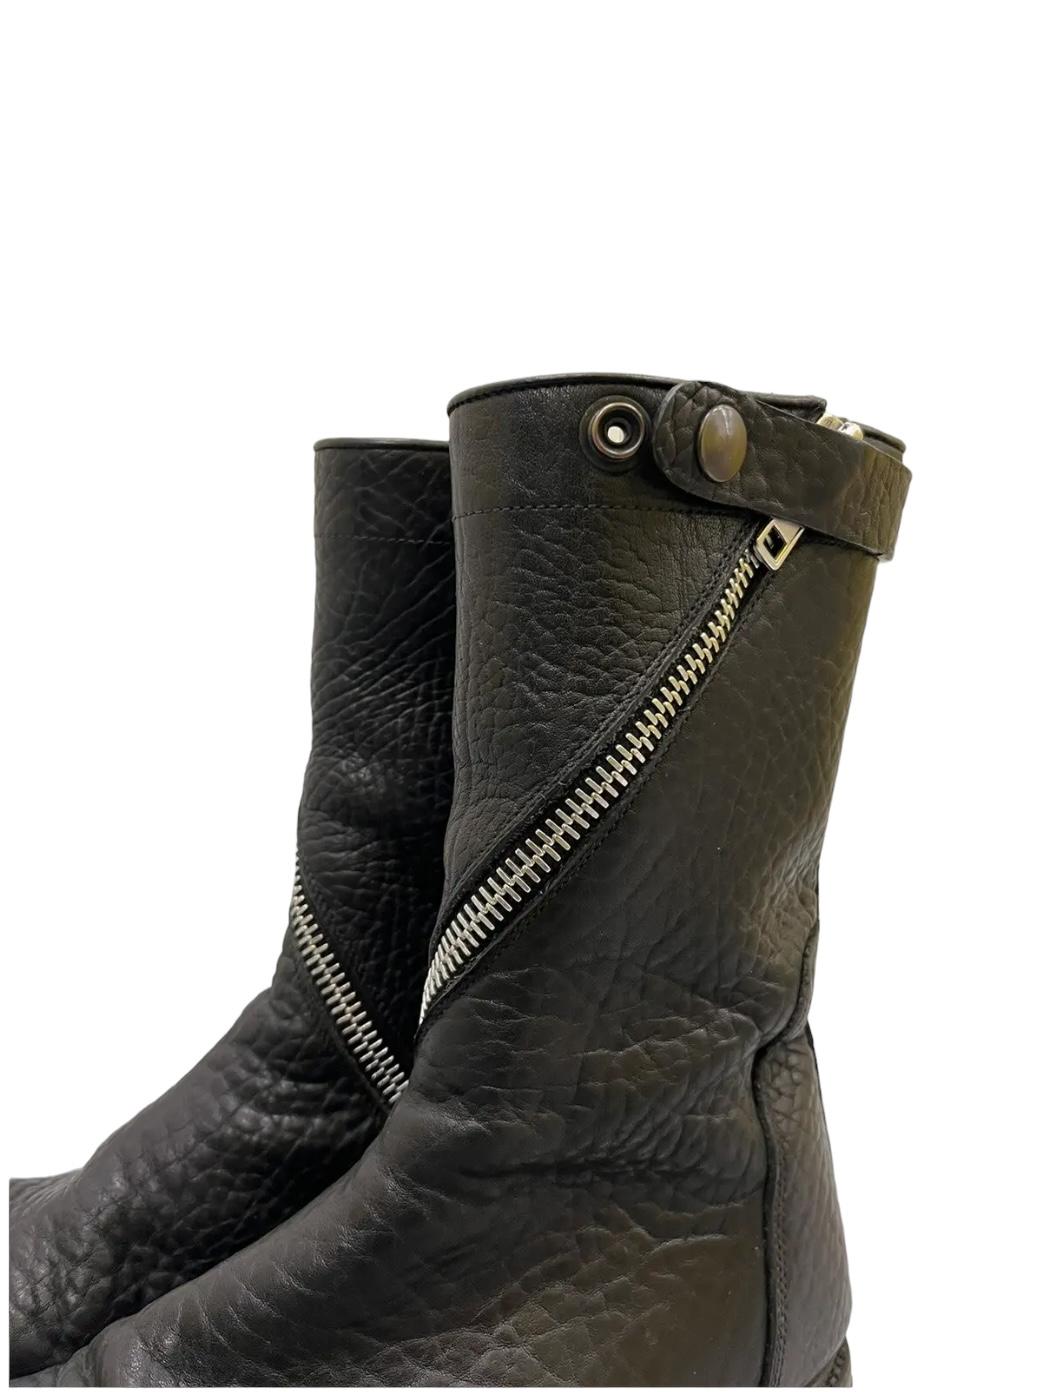 Rick Owens FW 11 Limo Spiral Leather Zip Boots 2